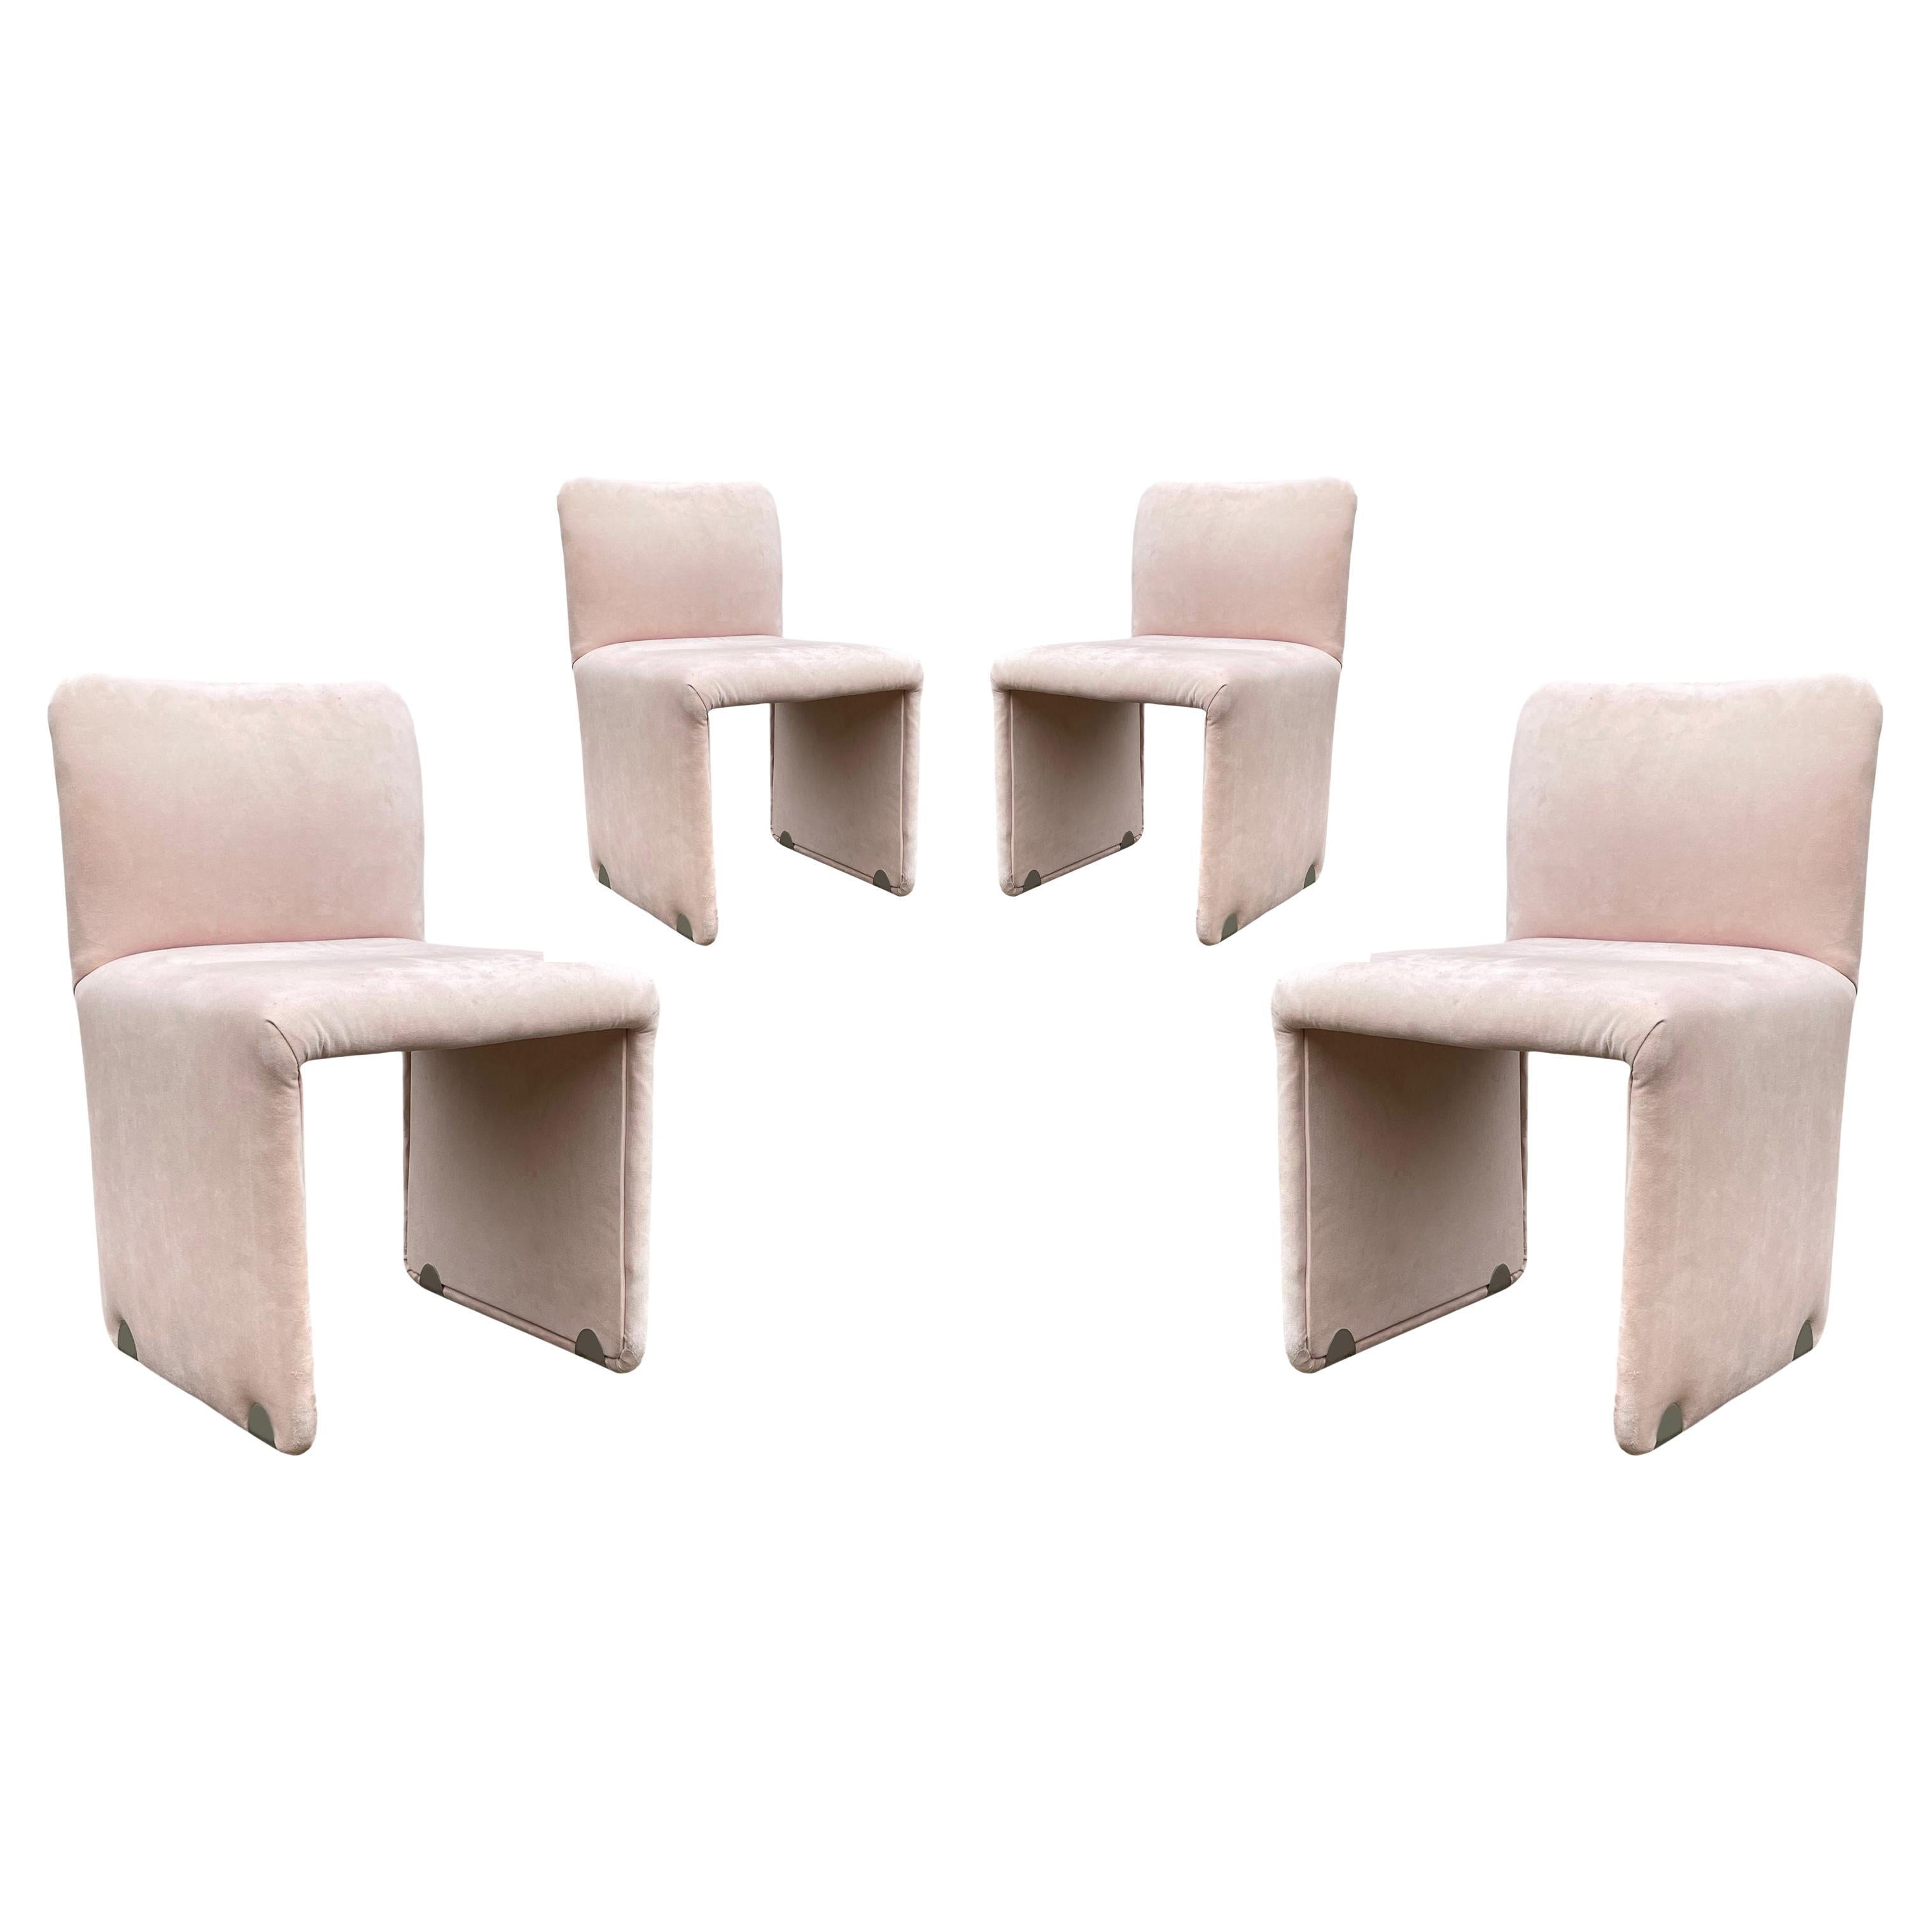 Set of 4 Mid Century Italian Modern Dining Chairs in Blush Pink Suede For Sale